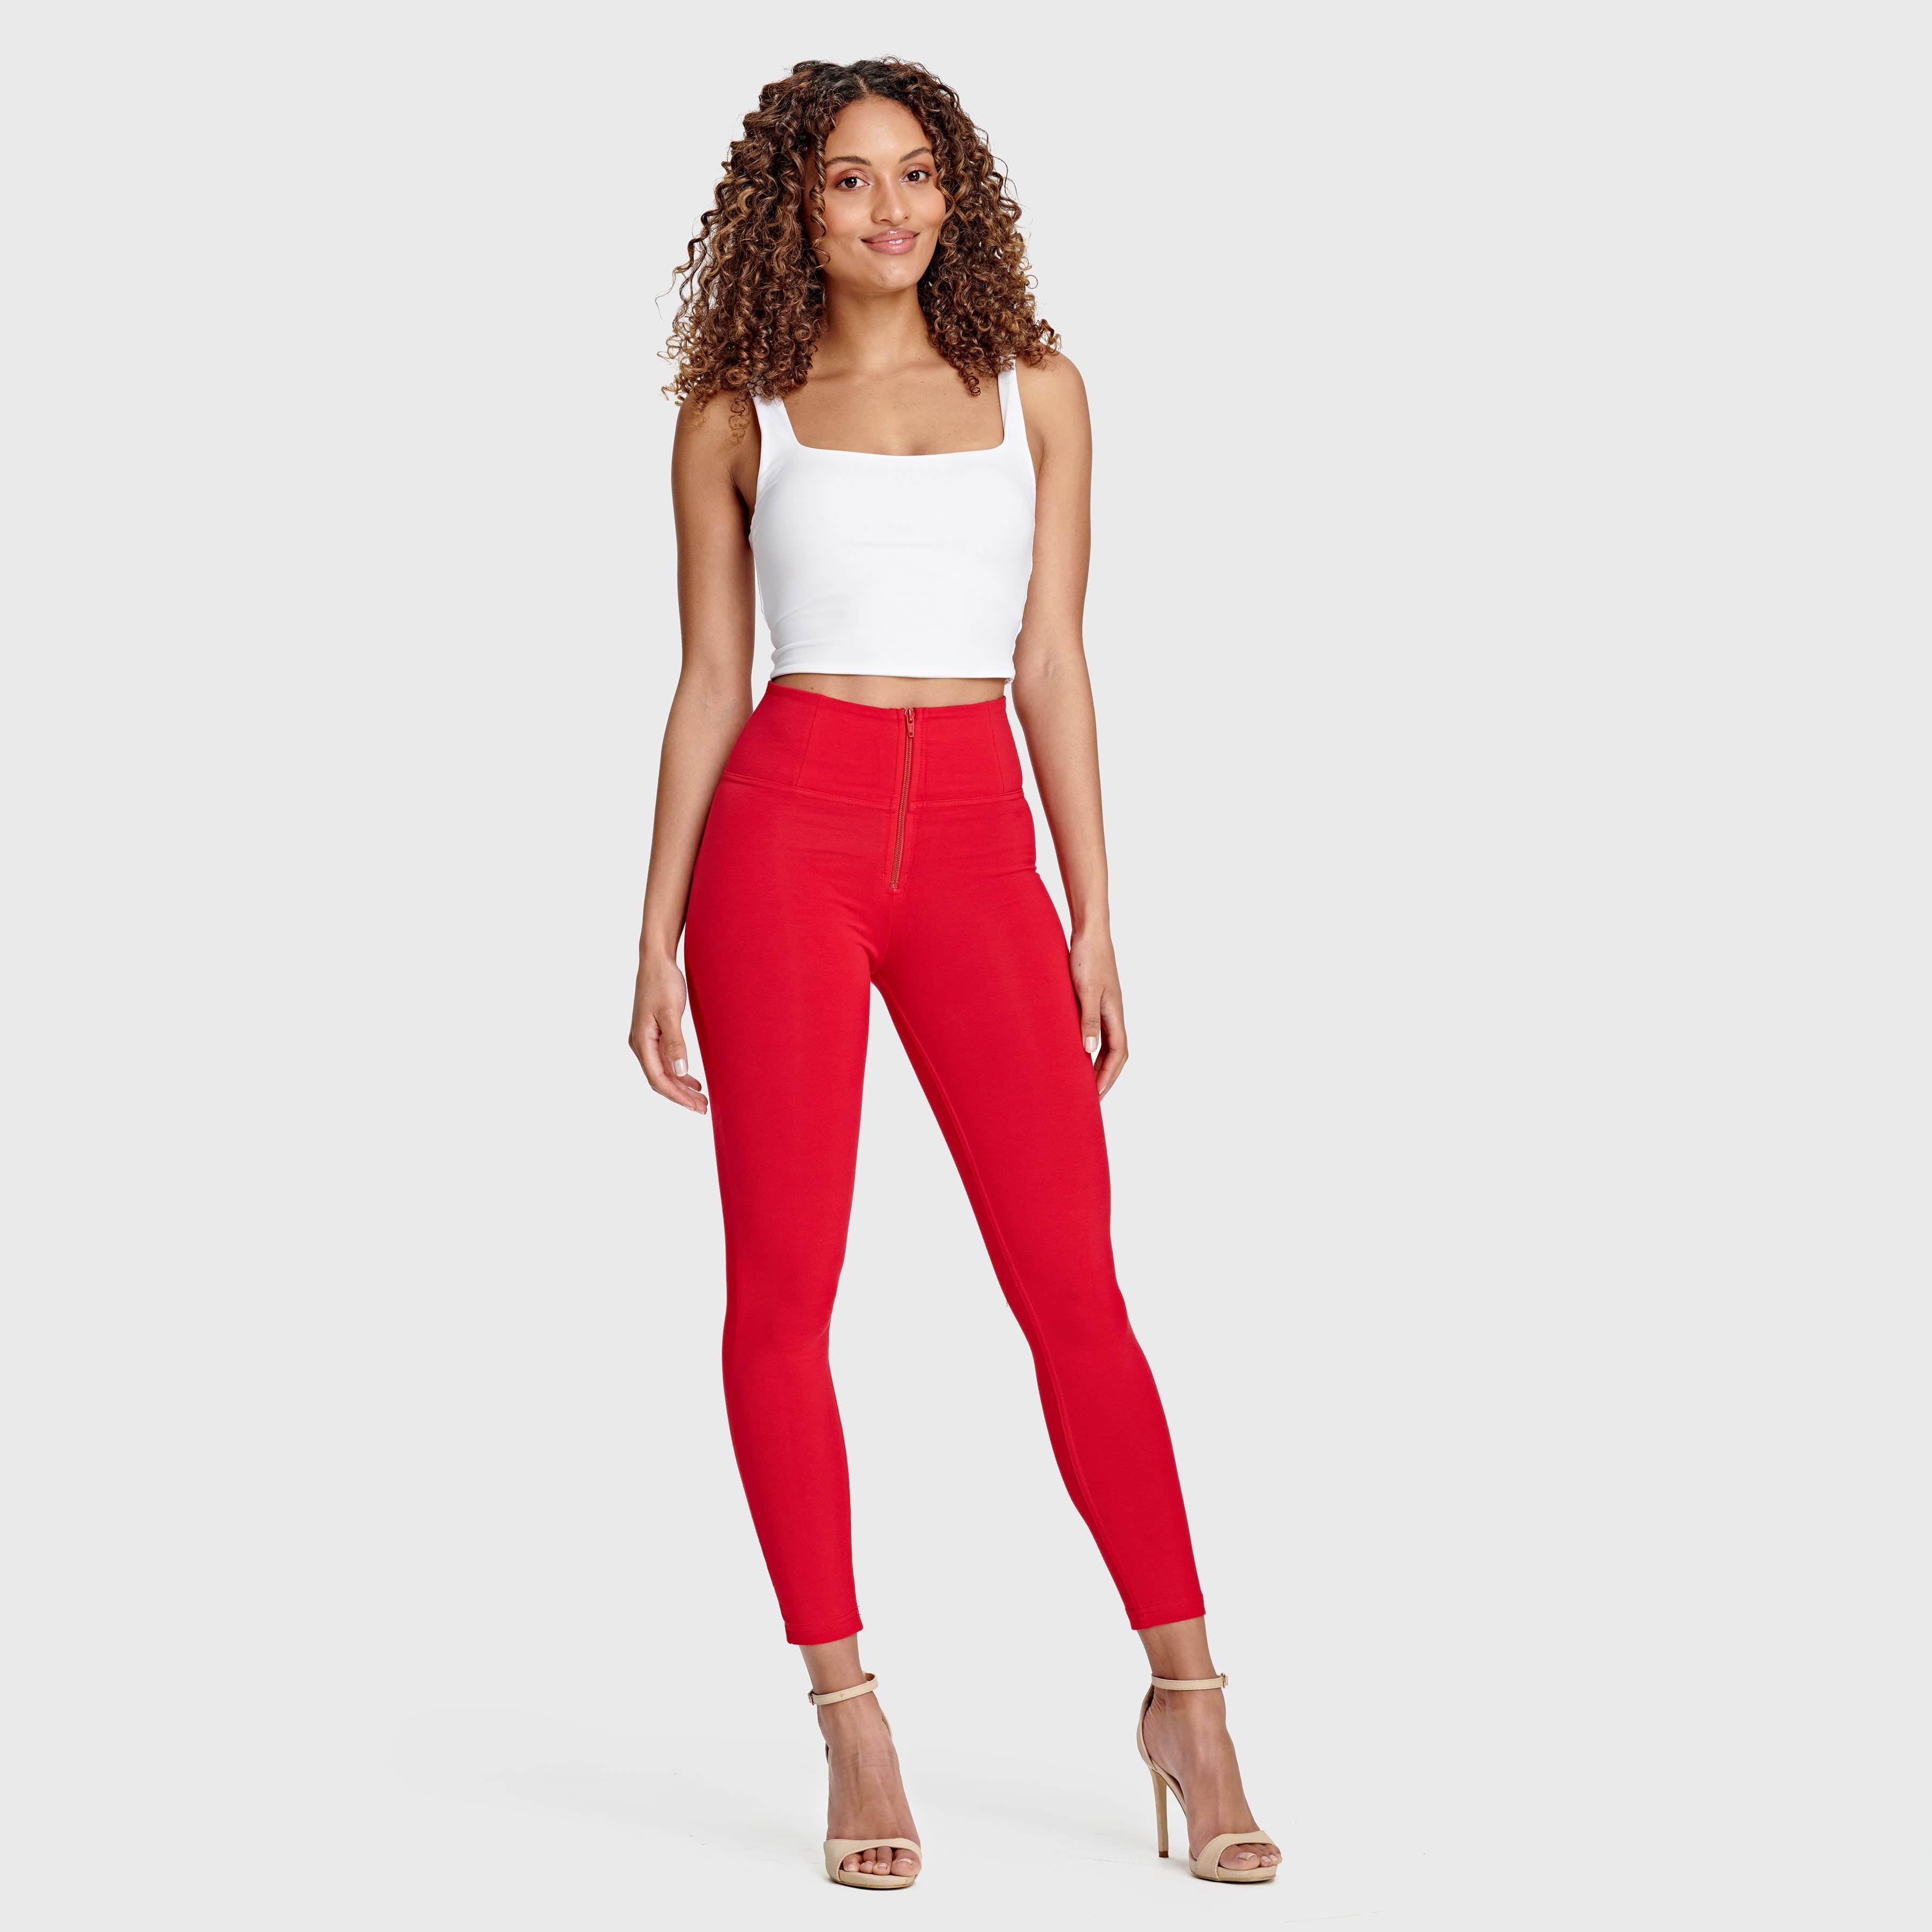 WR.UP® Fashion - High Waisted - 7/8 Length - Red 3